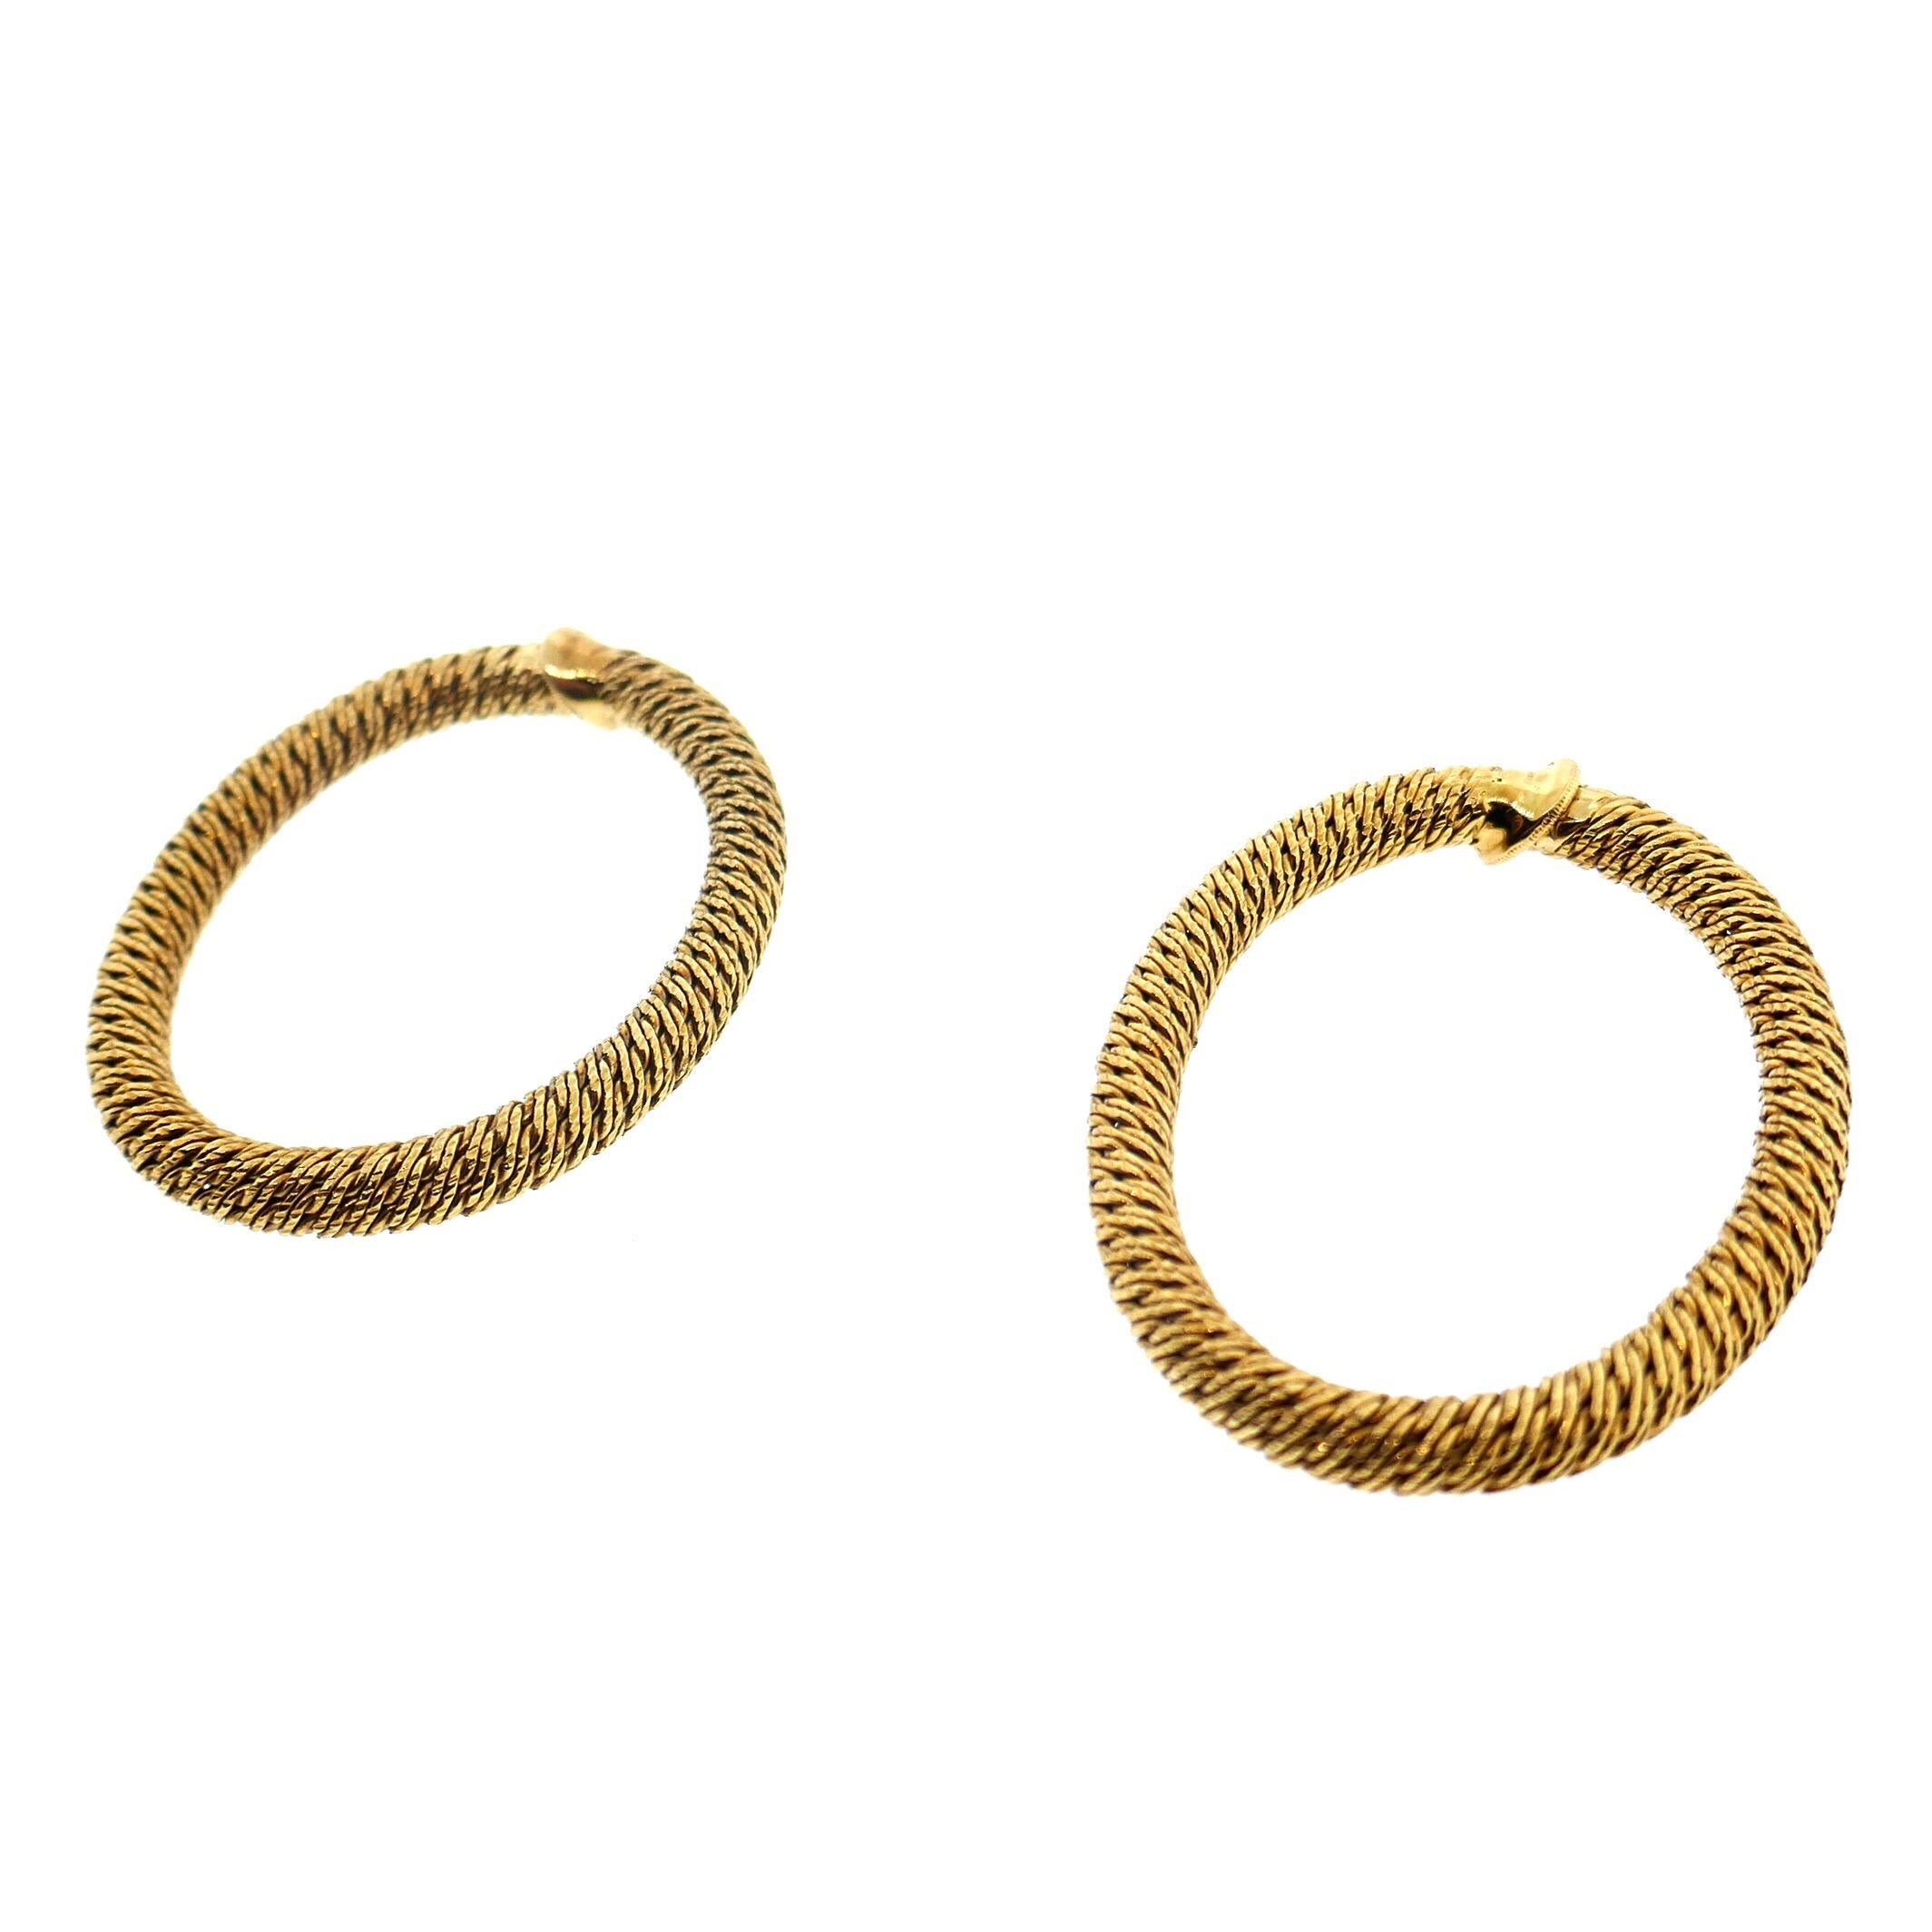 Georges L'Enfant French Yellow Gold Woven Textured Hoop Earrings

Here is your chance to get an extremely rare and exquisite pair of Georges L'Enfant earrings. They are comprised of 18K yellow gold in the iconic L'Enfant woven pattern, and feature